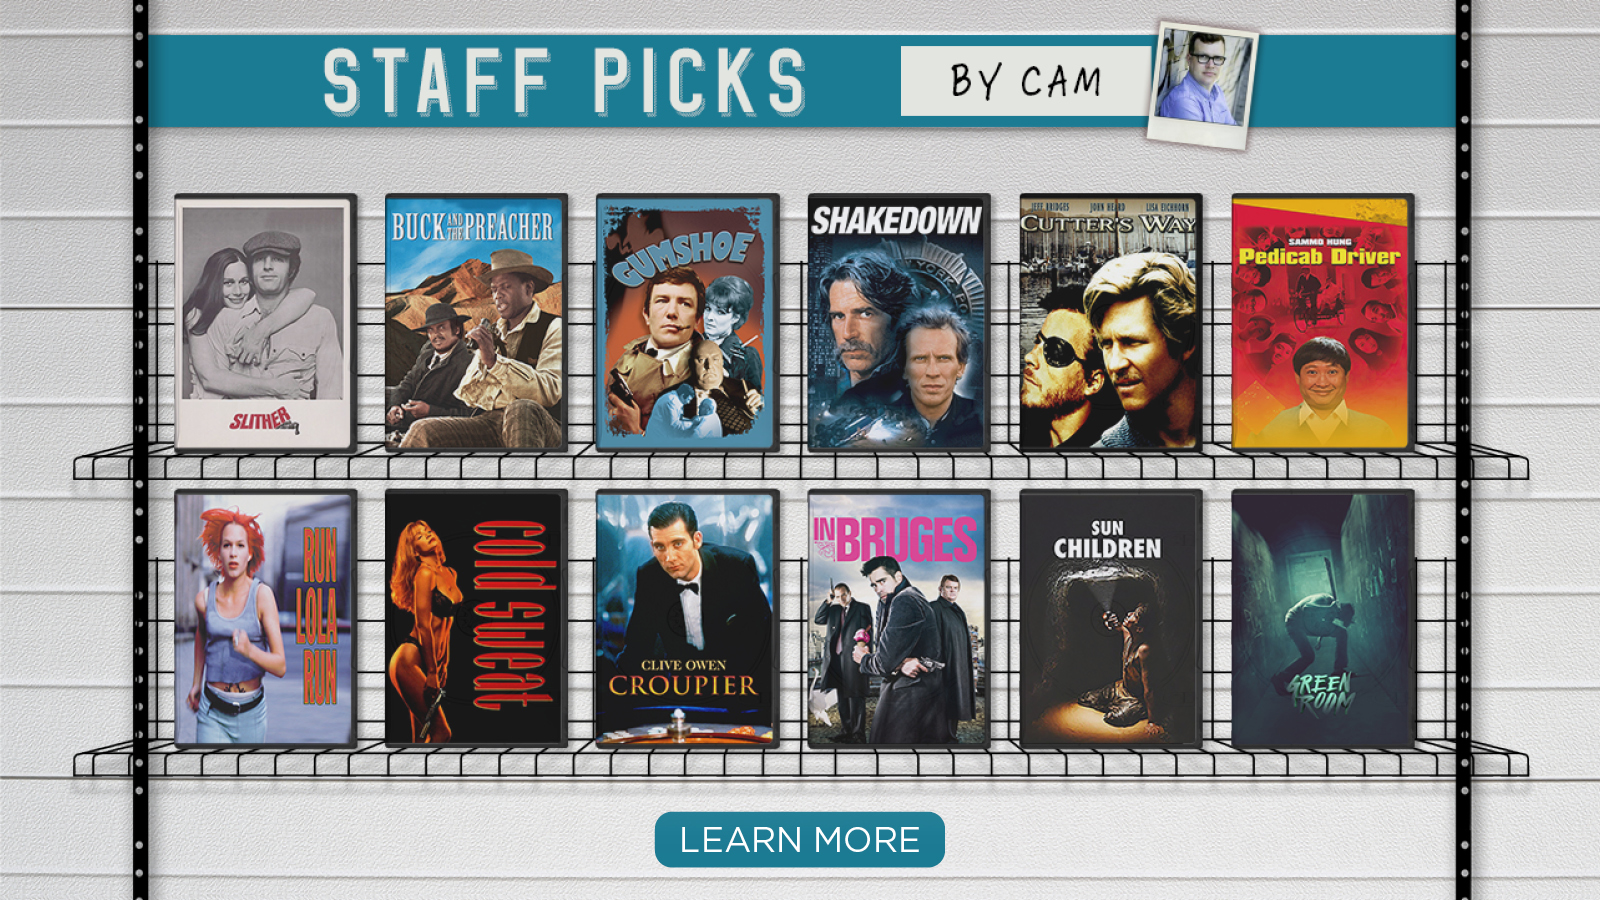 Staff Picks by Cam: Learn more